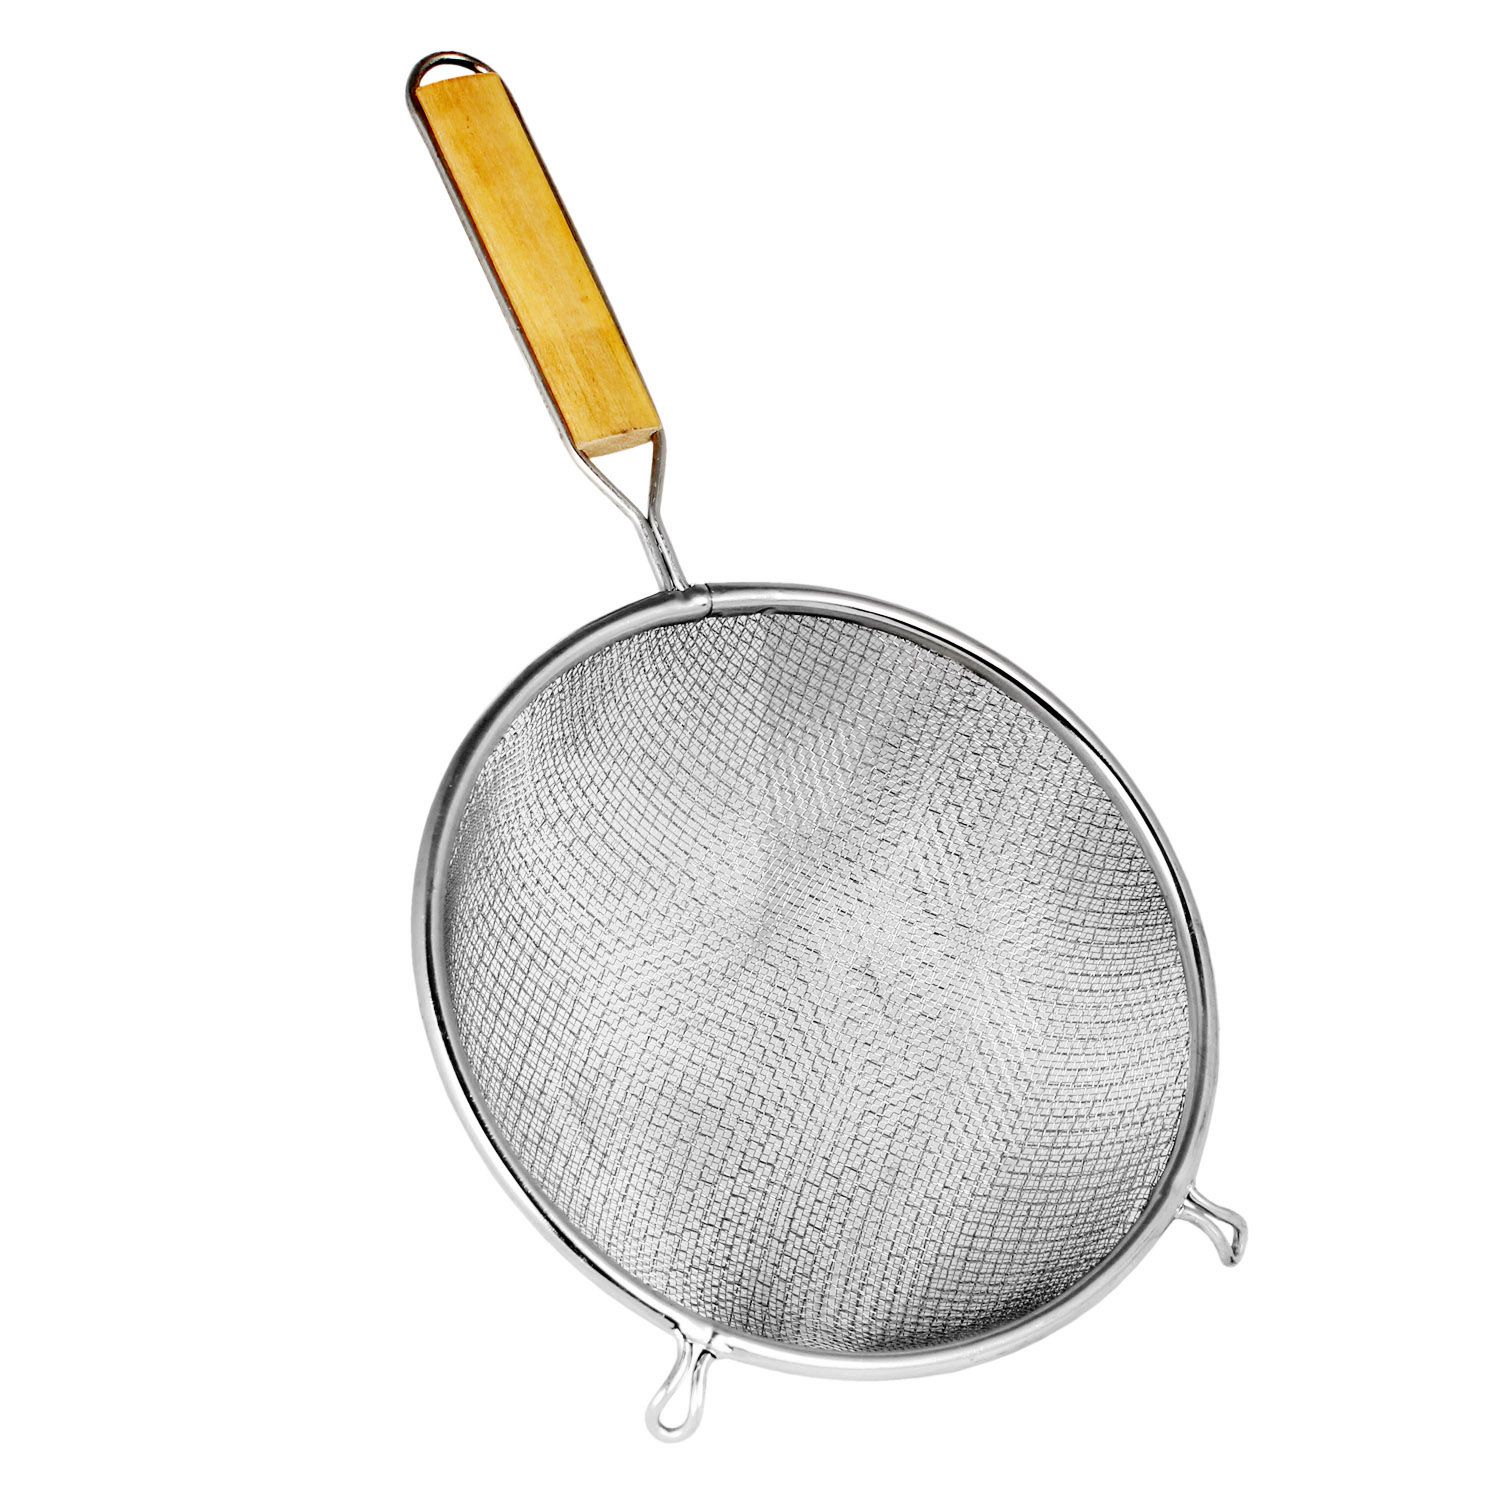 Thunder Group Double Medium Mesh Strainer with Wooden Handle